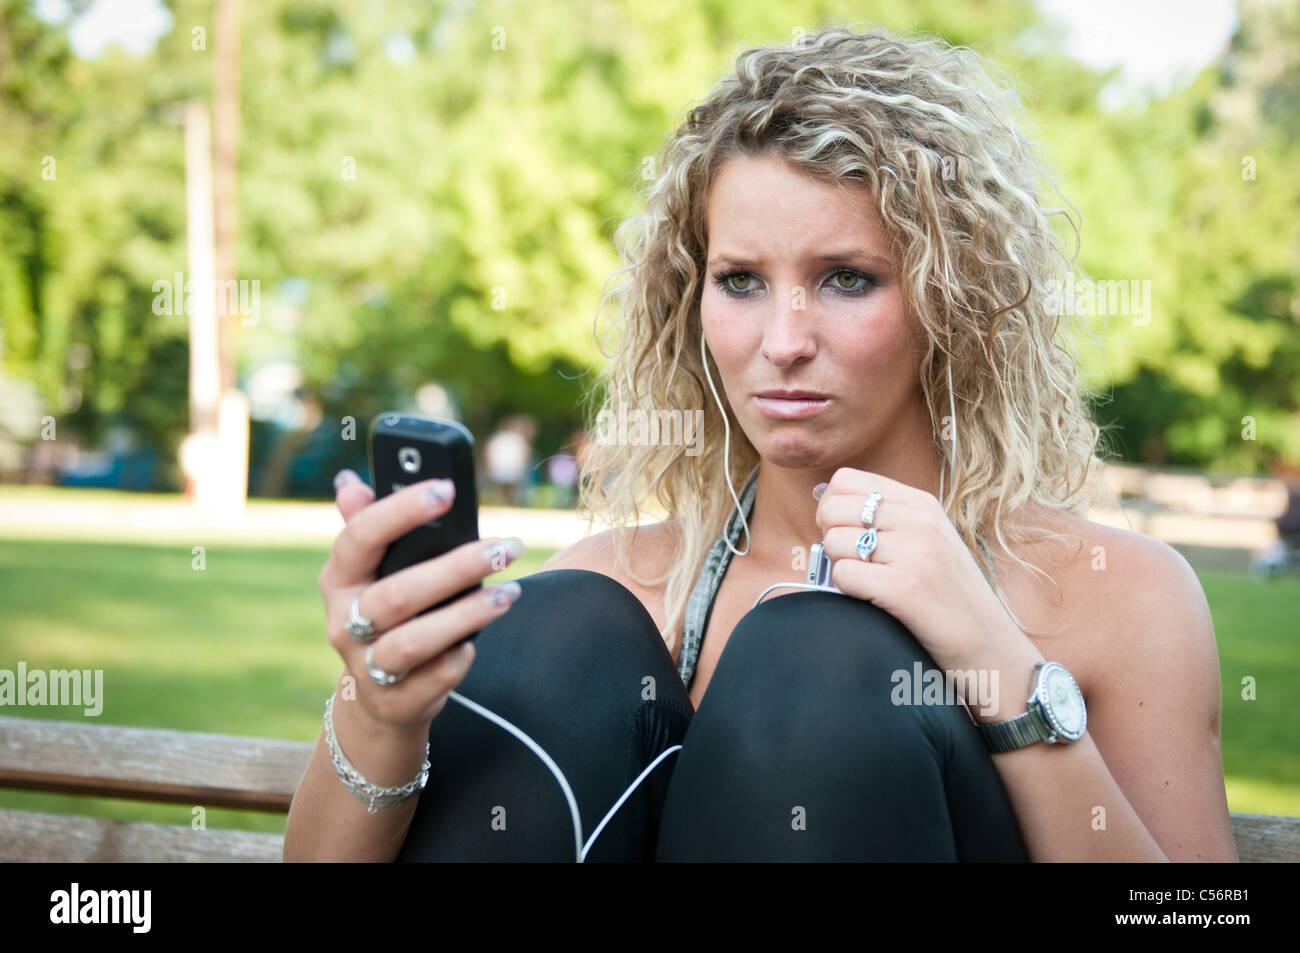 Bad message - woman with cellphone Stock Photo